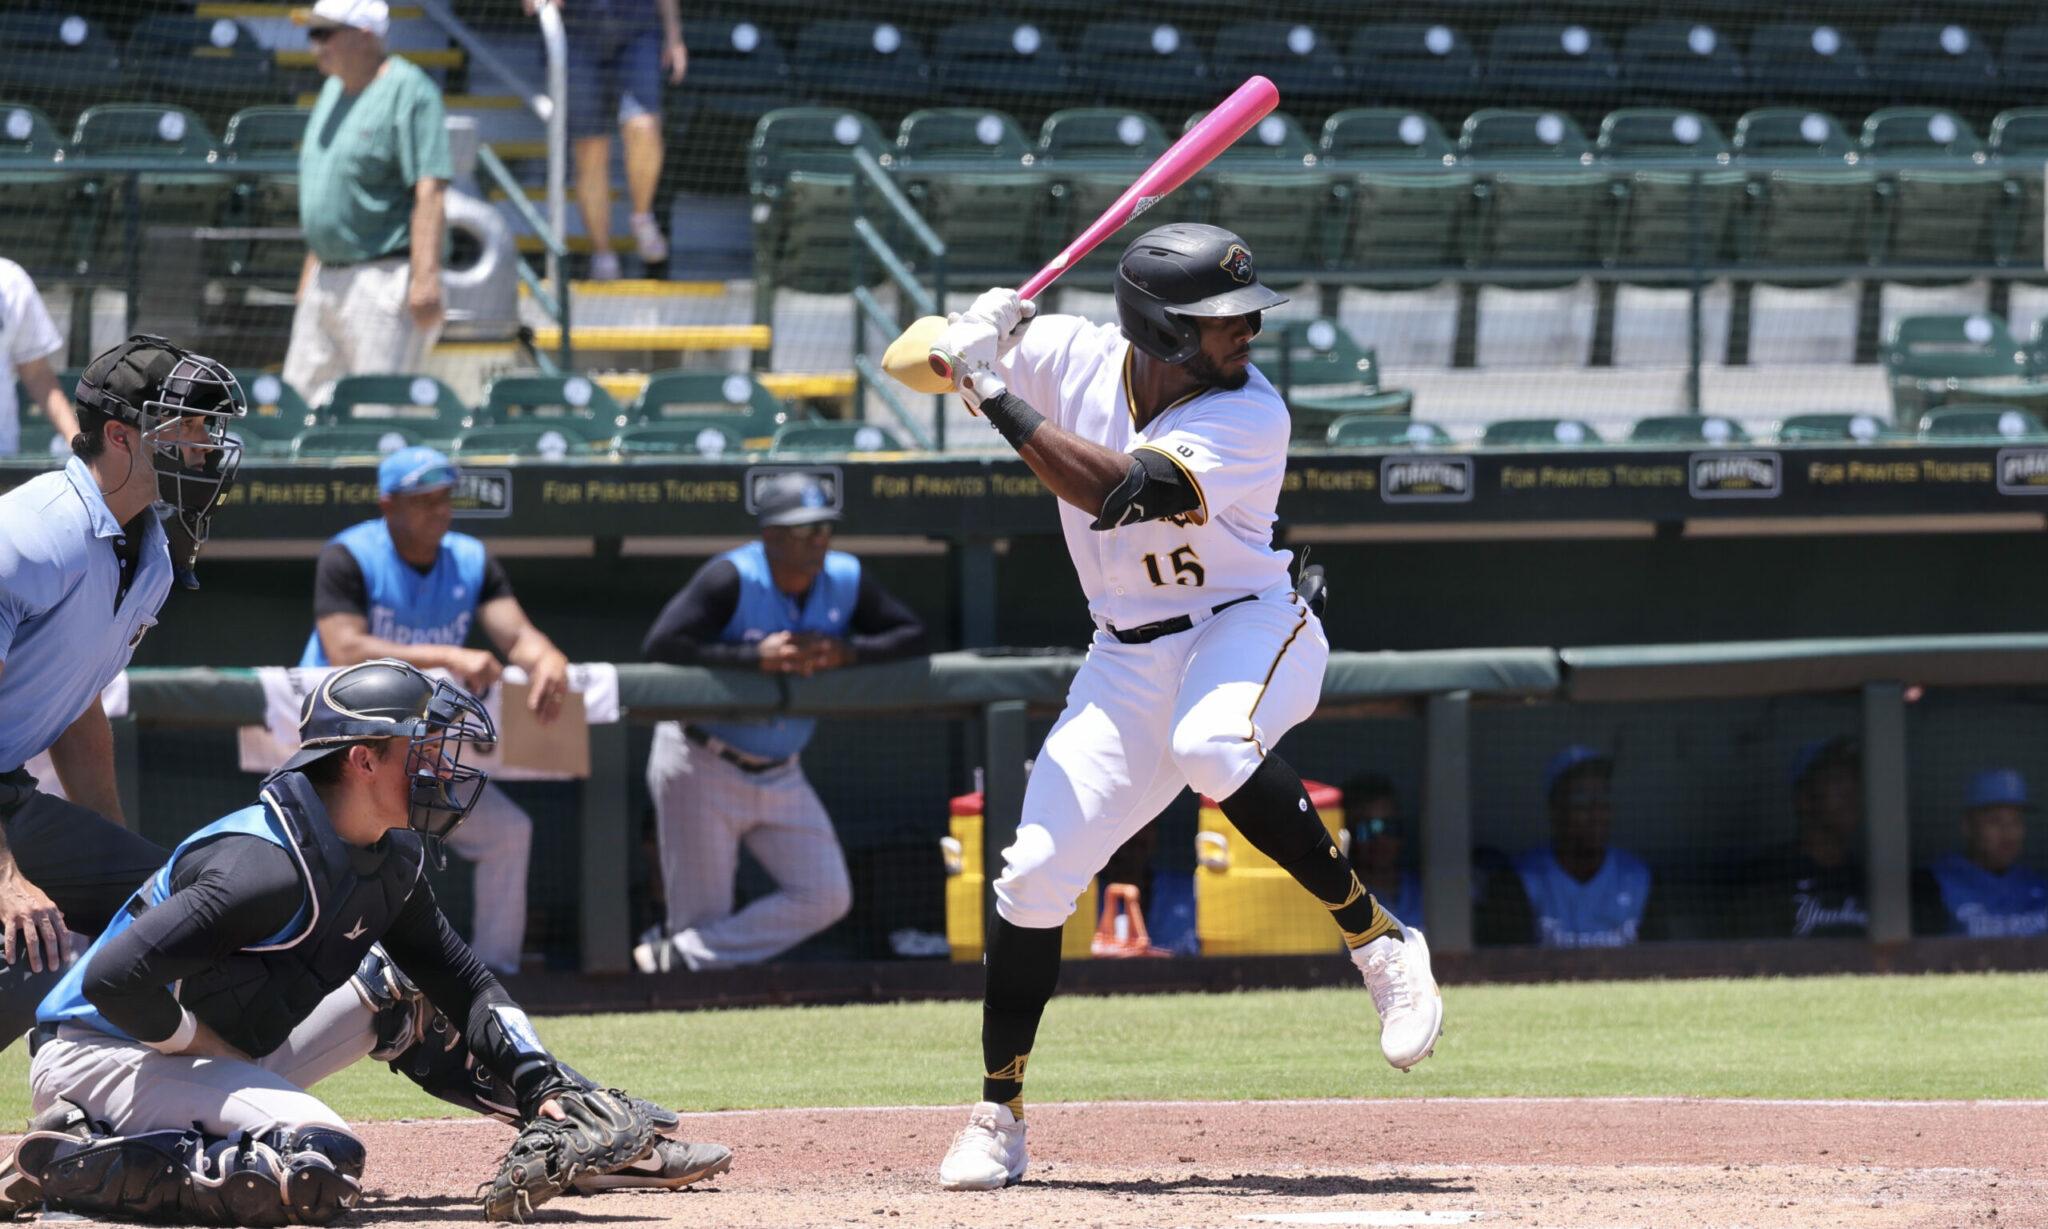 Pirates Winter Leagues: Three Pirates Contribute to the Offense in Colombia